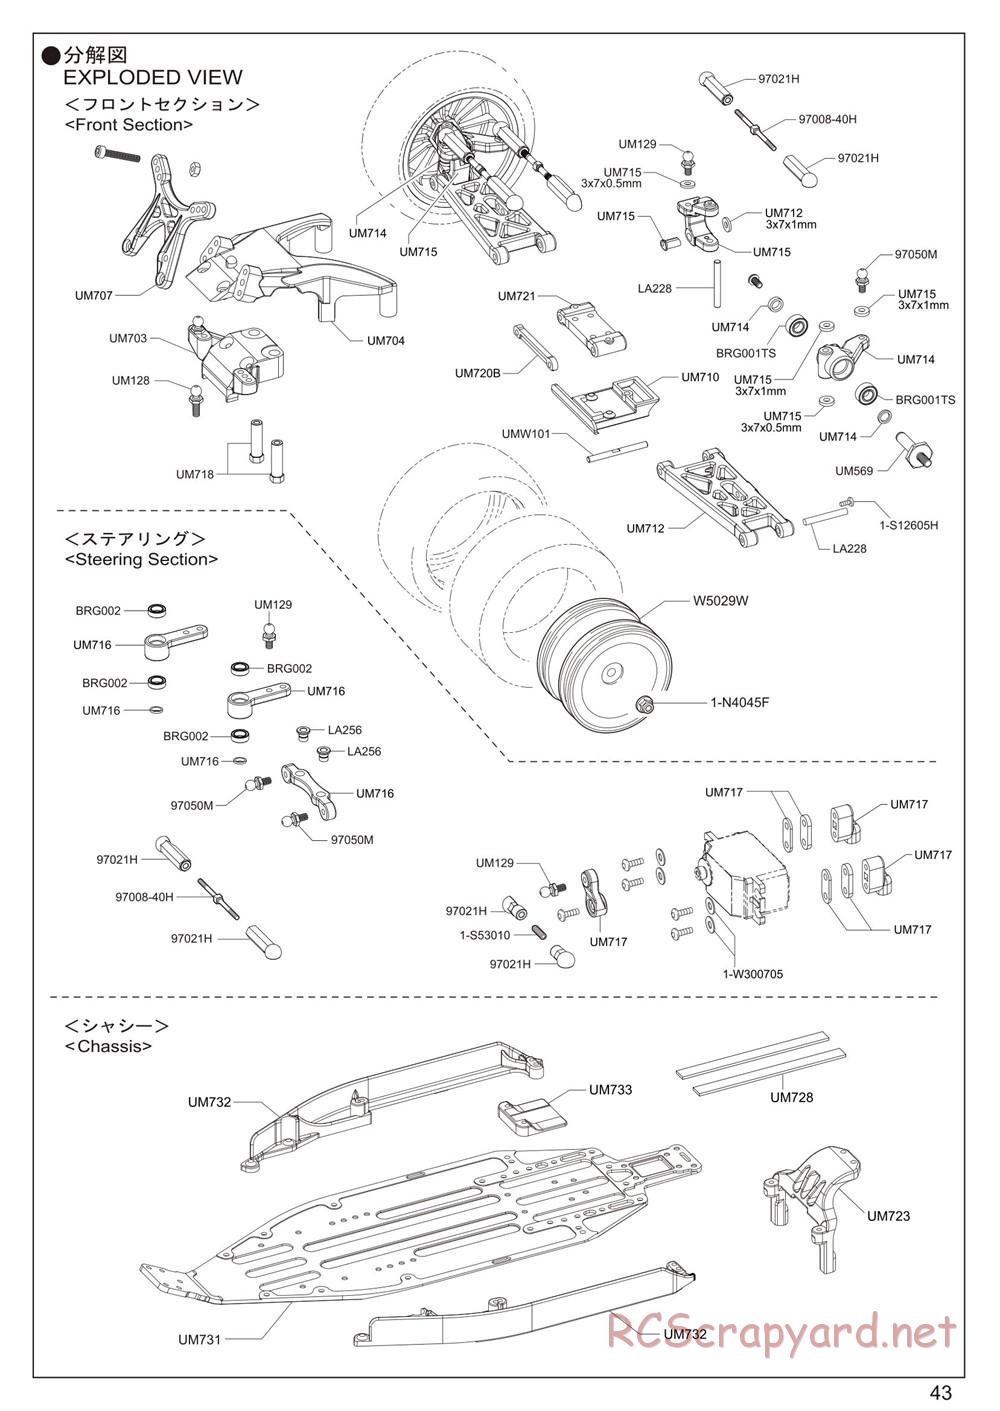 Kyosho - Ultima RB6.6 - Manual - Page 43